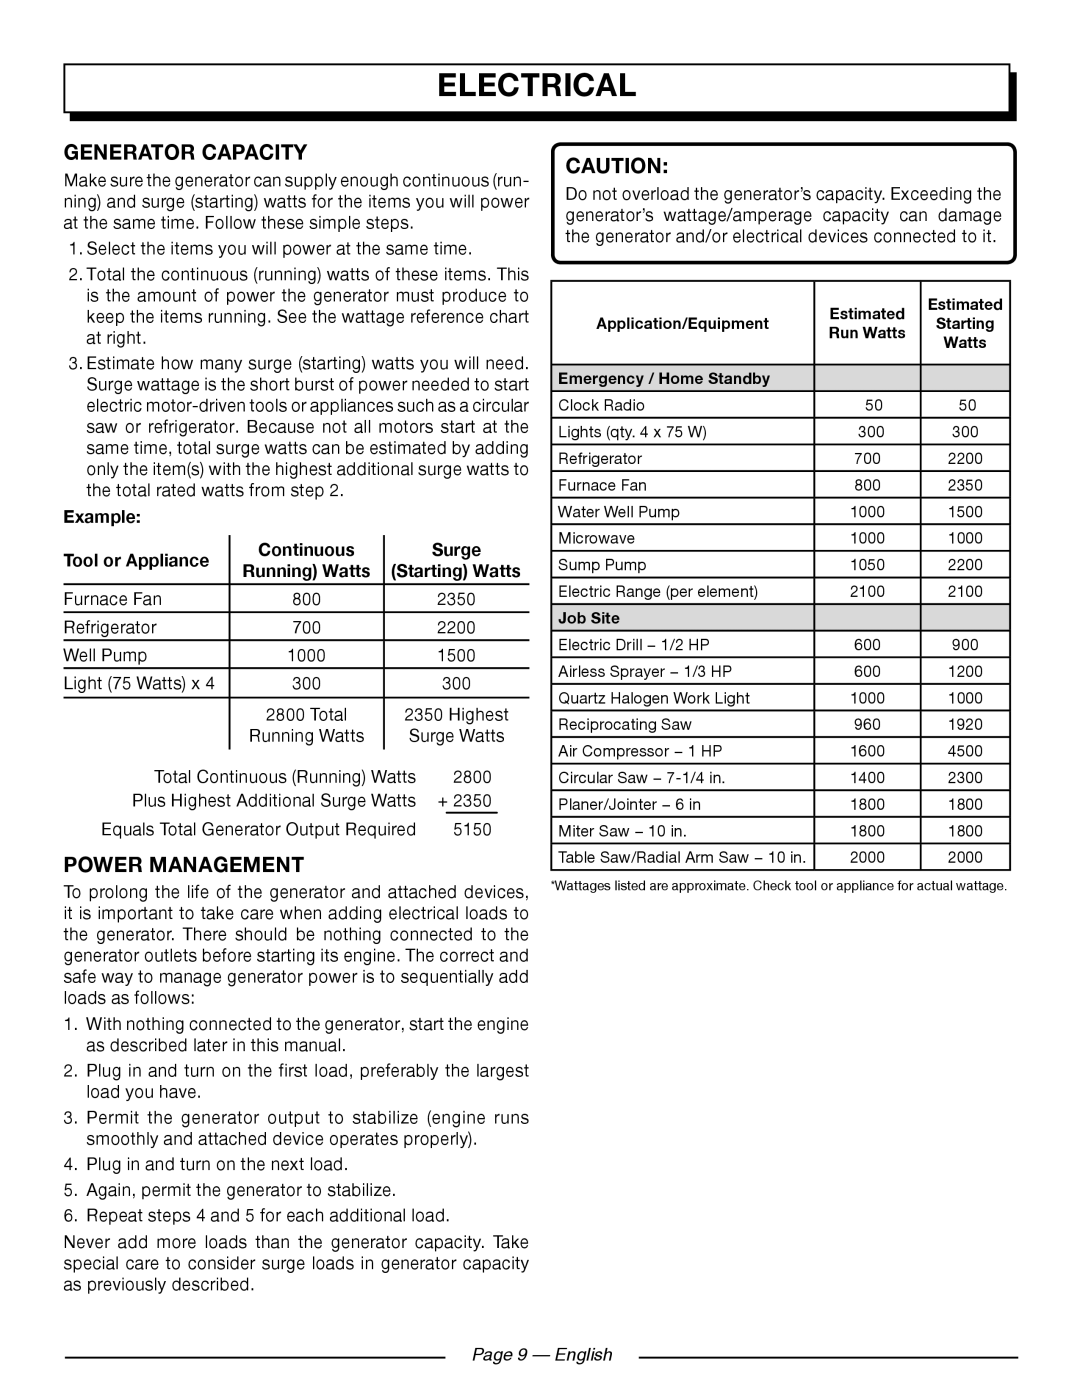 Homelite UT902250 Generator Capacity, Power Management, Page 9 — English, Electrical, Example, Tool or Appliance, Surge 